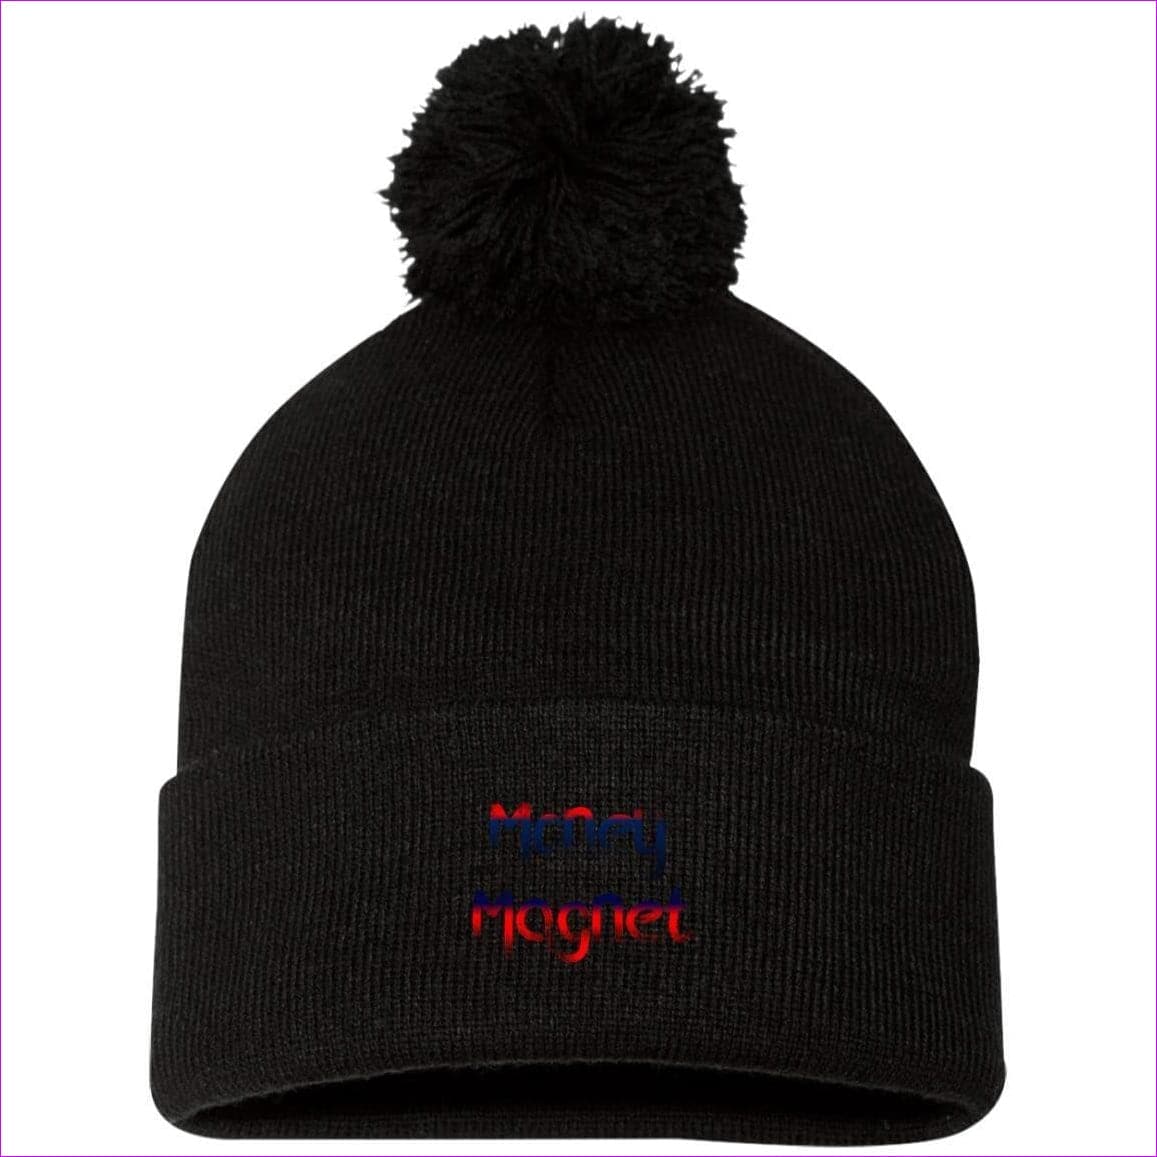 SP15 Pom Pom Knit Cap Black One Size Money Magnet Embroidered Knit Cap, Cap, Beanie - Beanie at TFC&H Co.